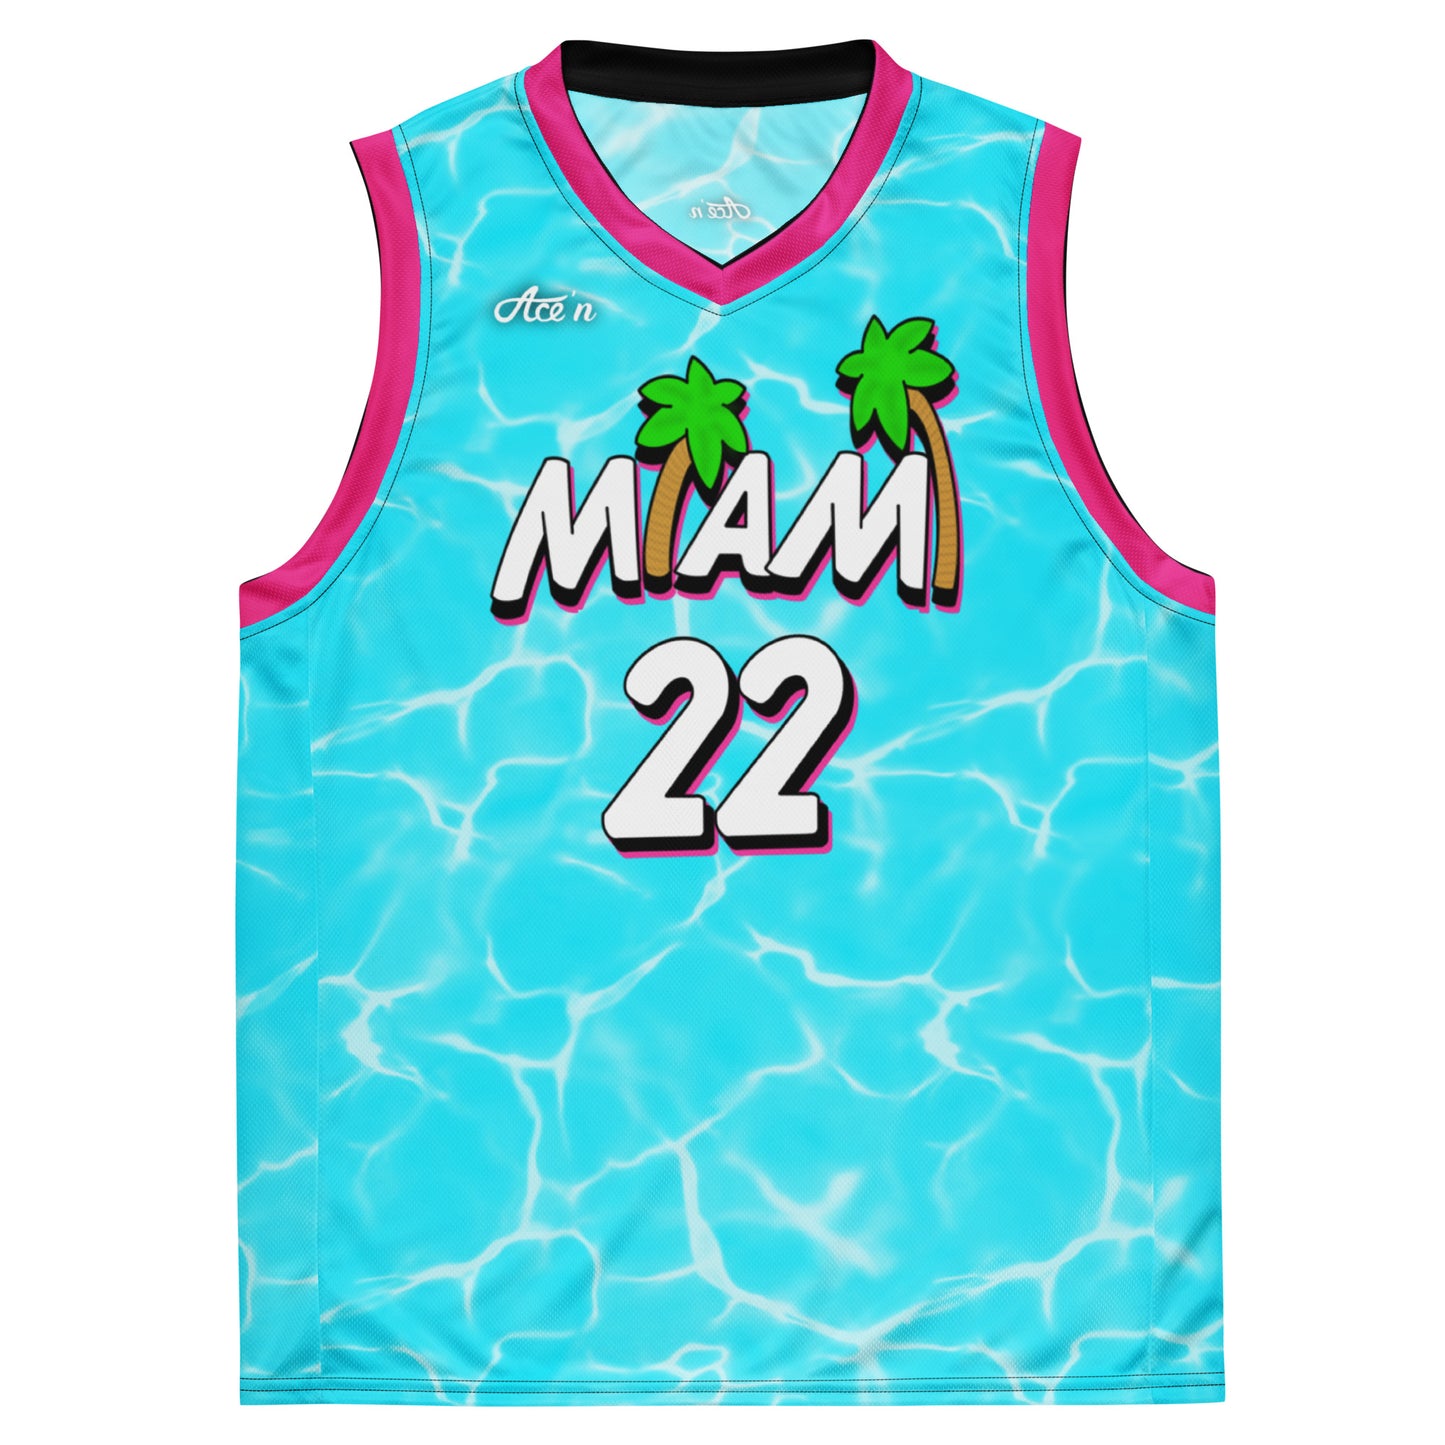 Ace'n "Miami" Jersey | Butler/#22